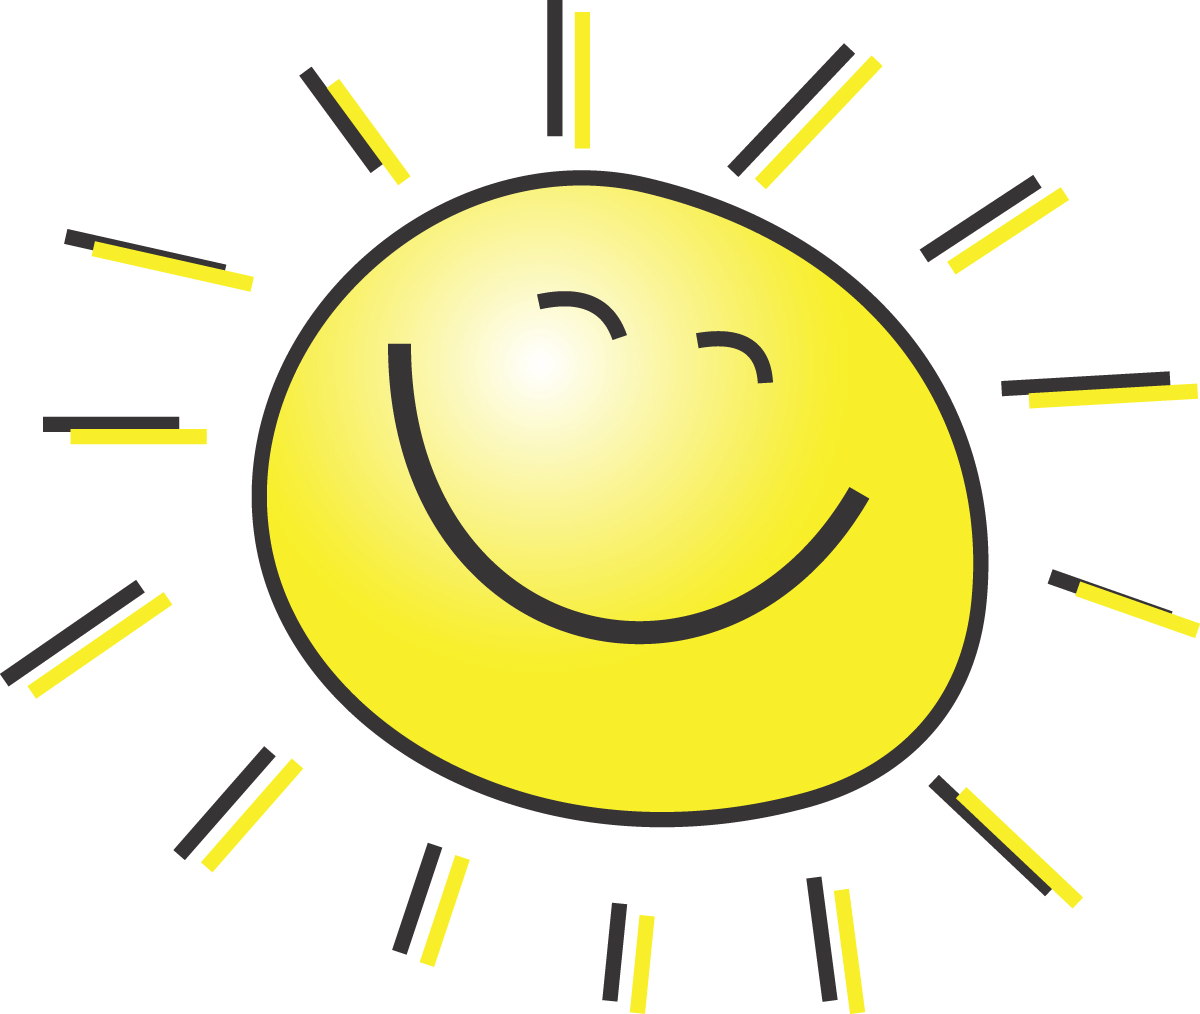 5-Free-Summer-Clipart-Illustration-Of-A-Happy-Smiling-Sun.jpg